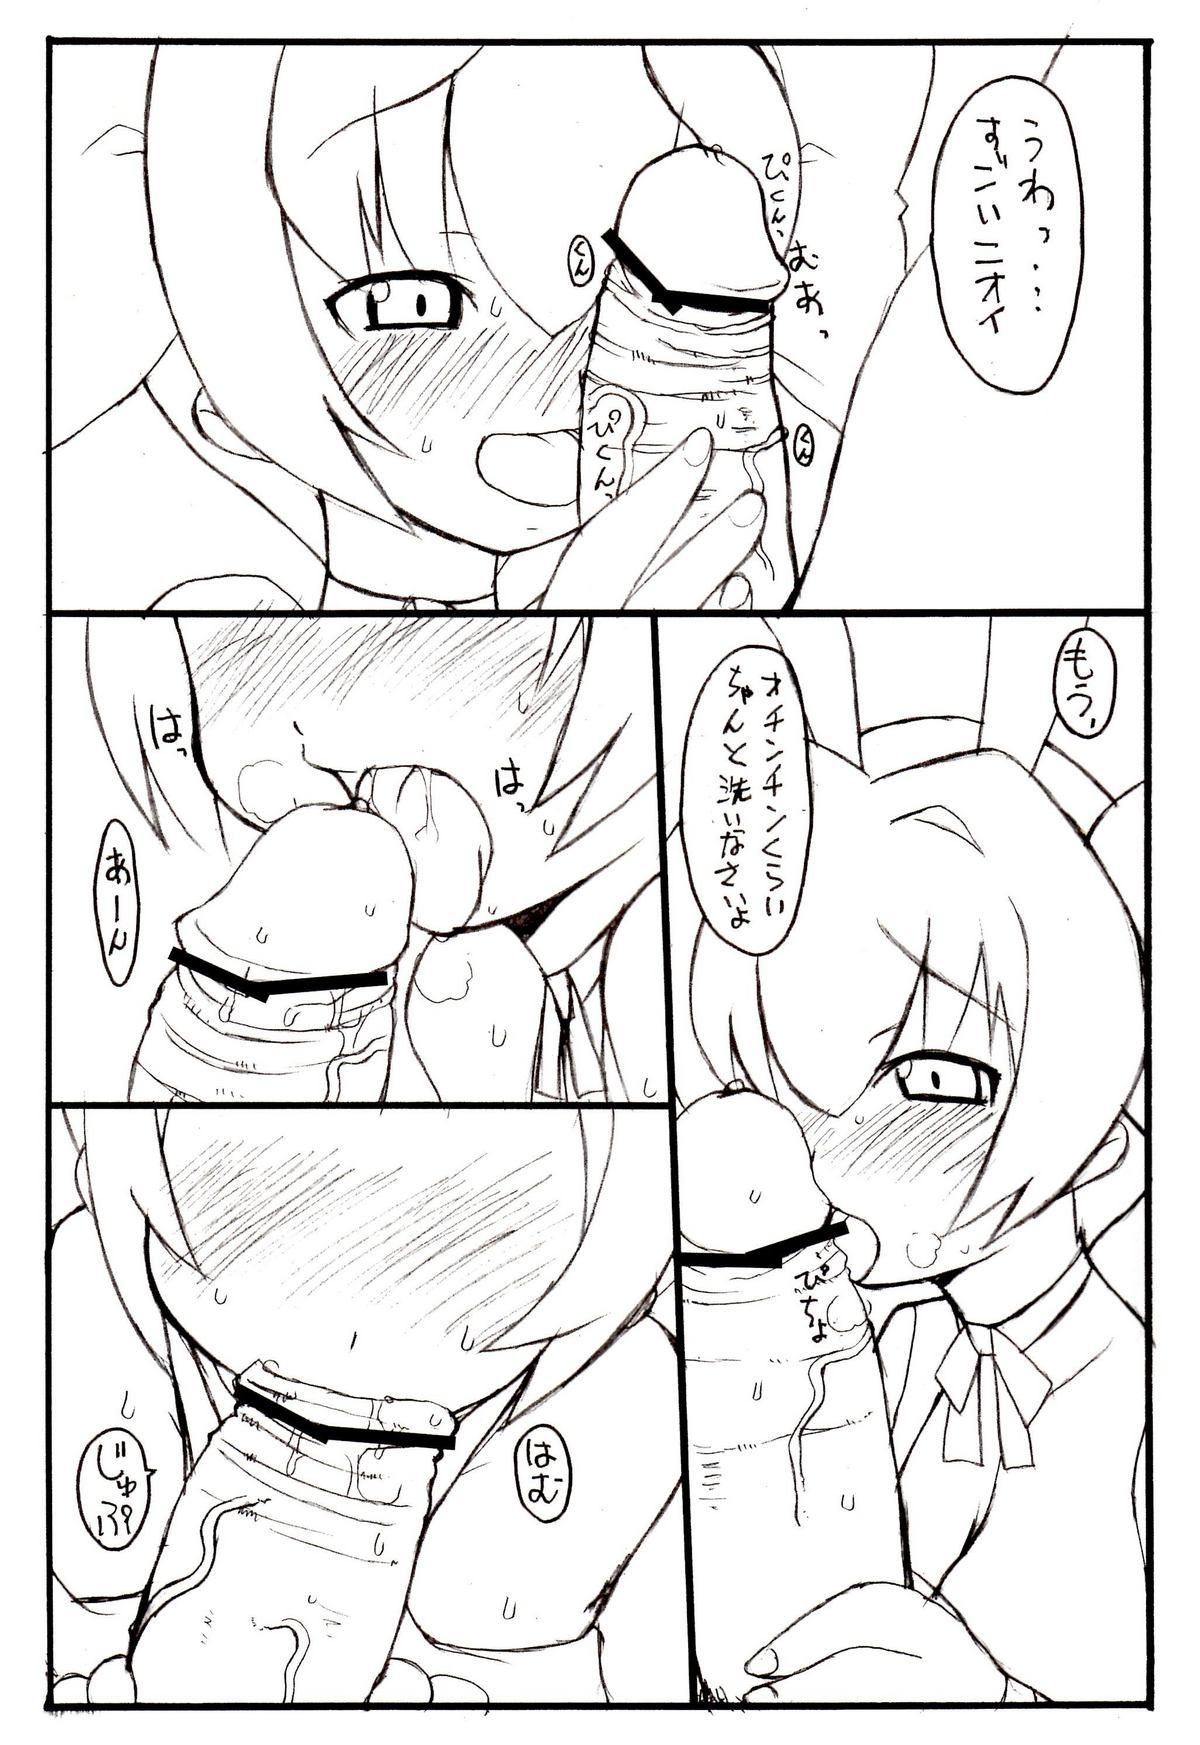 Free Rough Porn QUEEN ROSE - Di gi charat X - Page 4